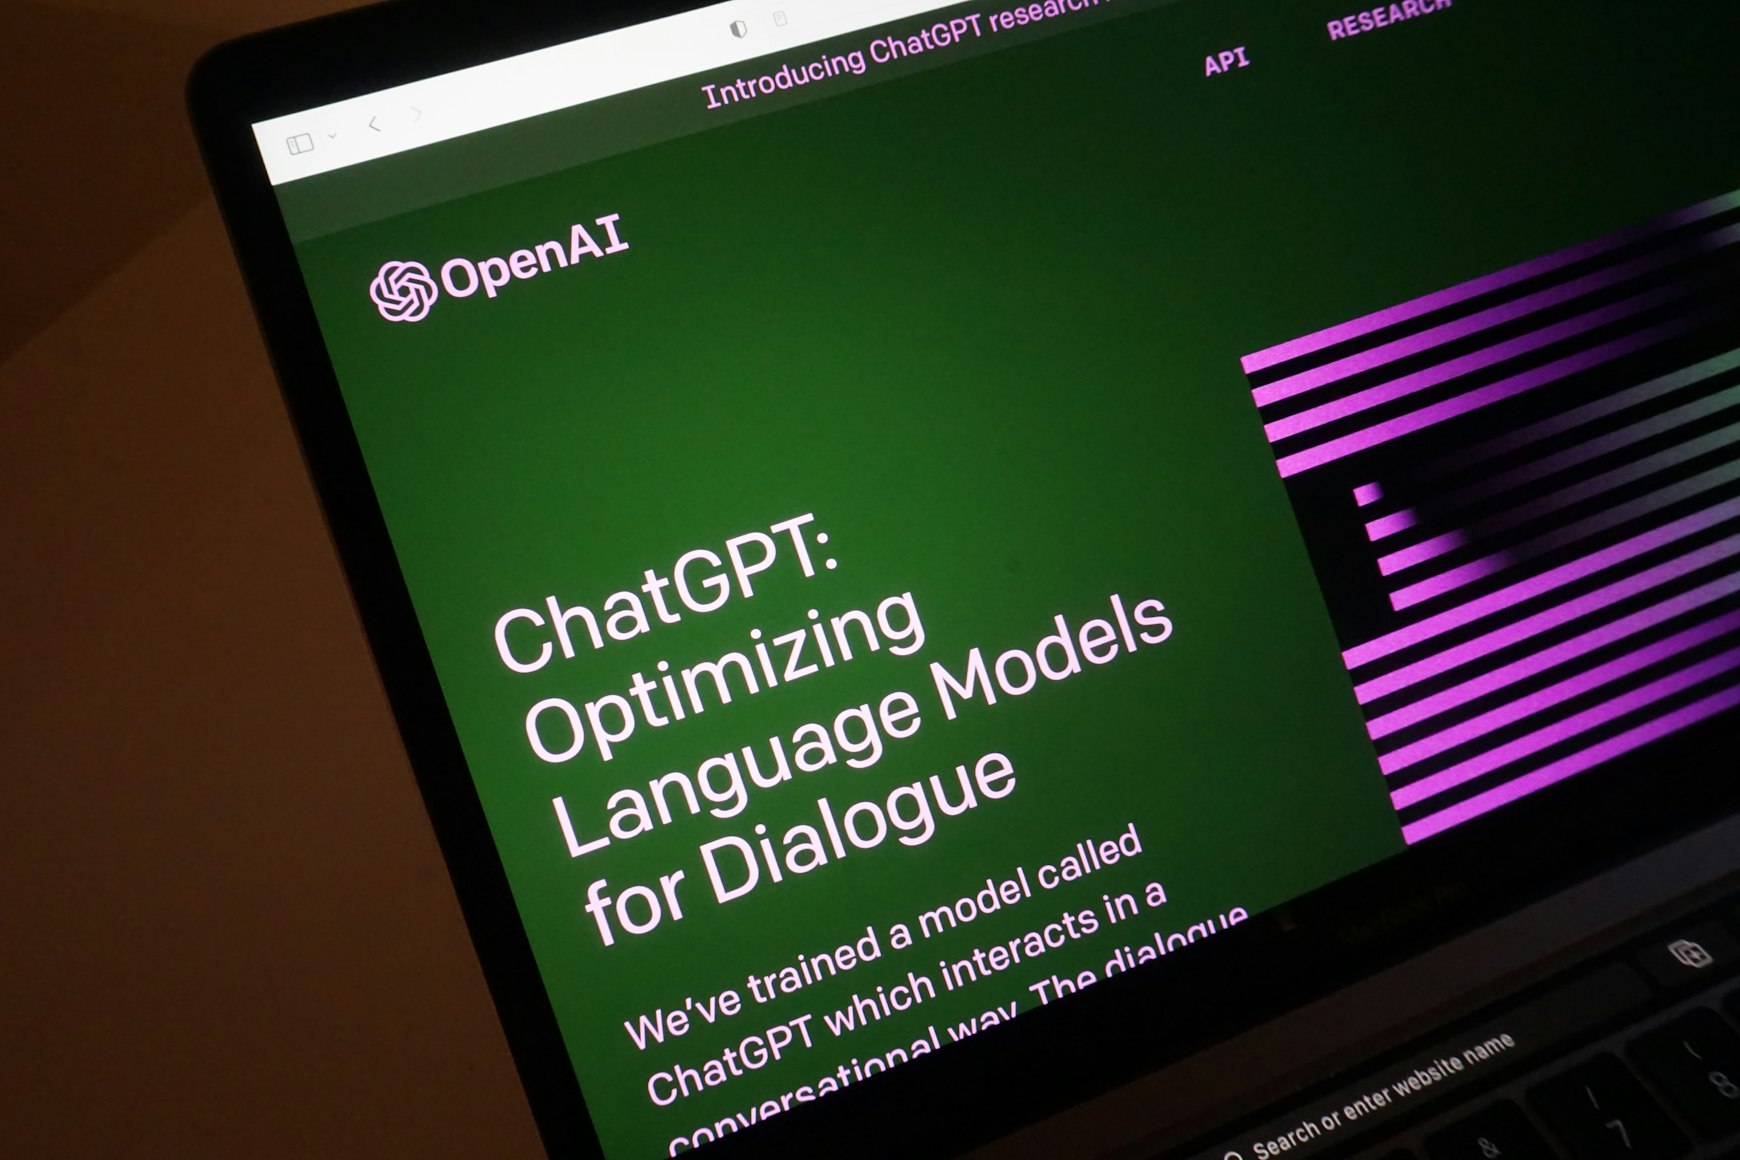 OpenAI's website showing a ChatGPT landing page